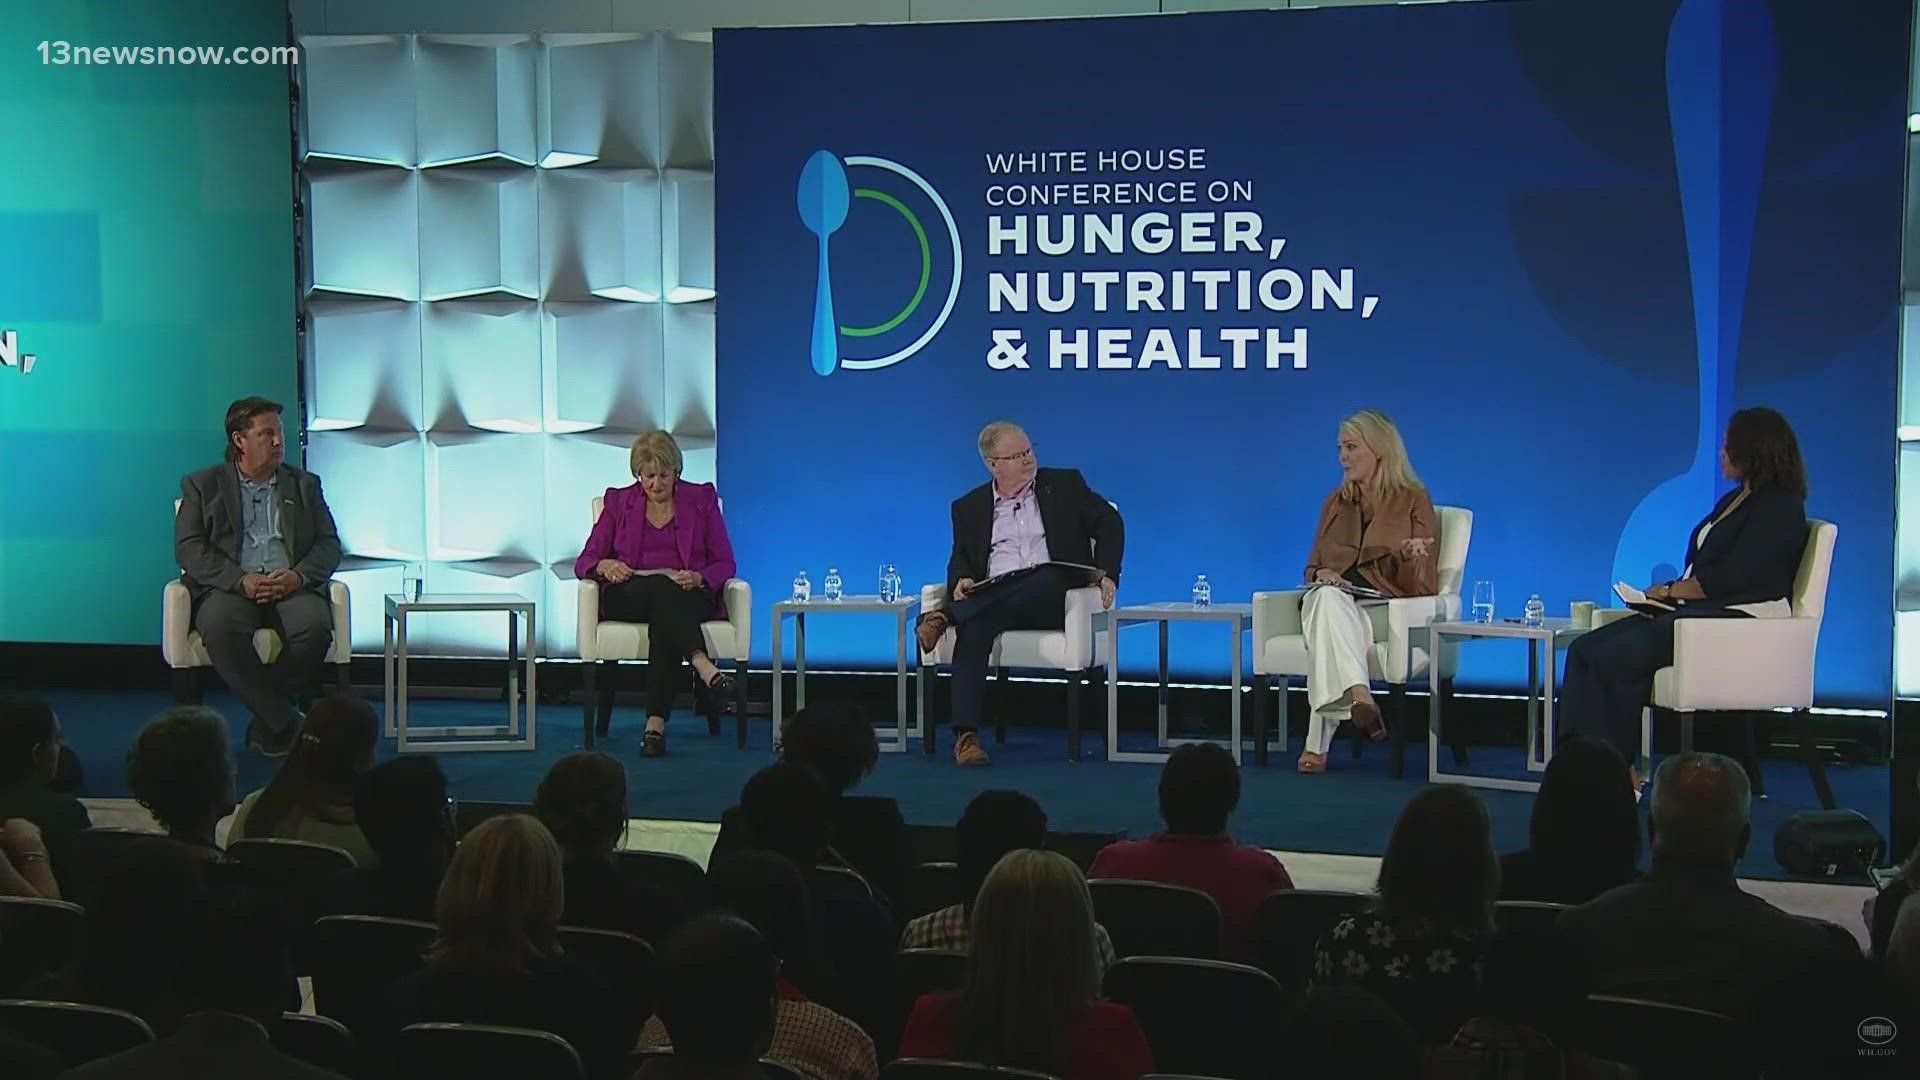 The White House Conference on Hunger, Nutrition and Health met to coordinate a strategy to fix this problem.